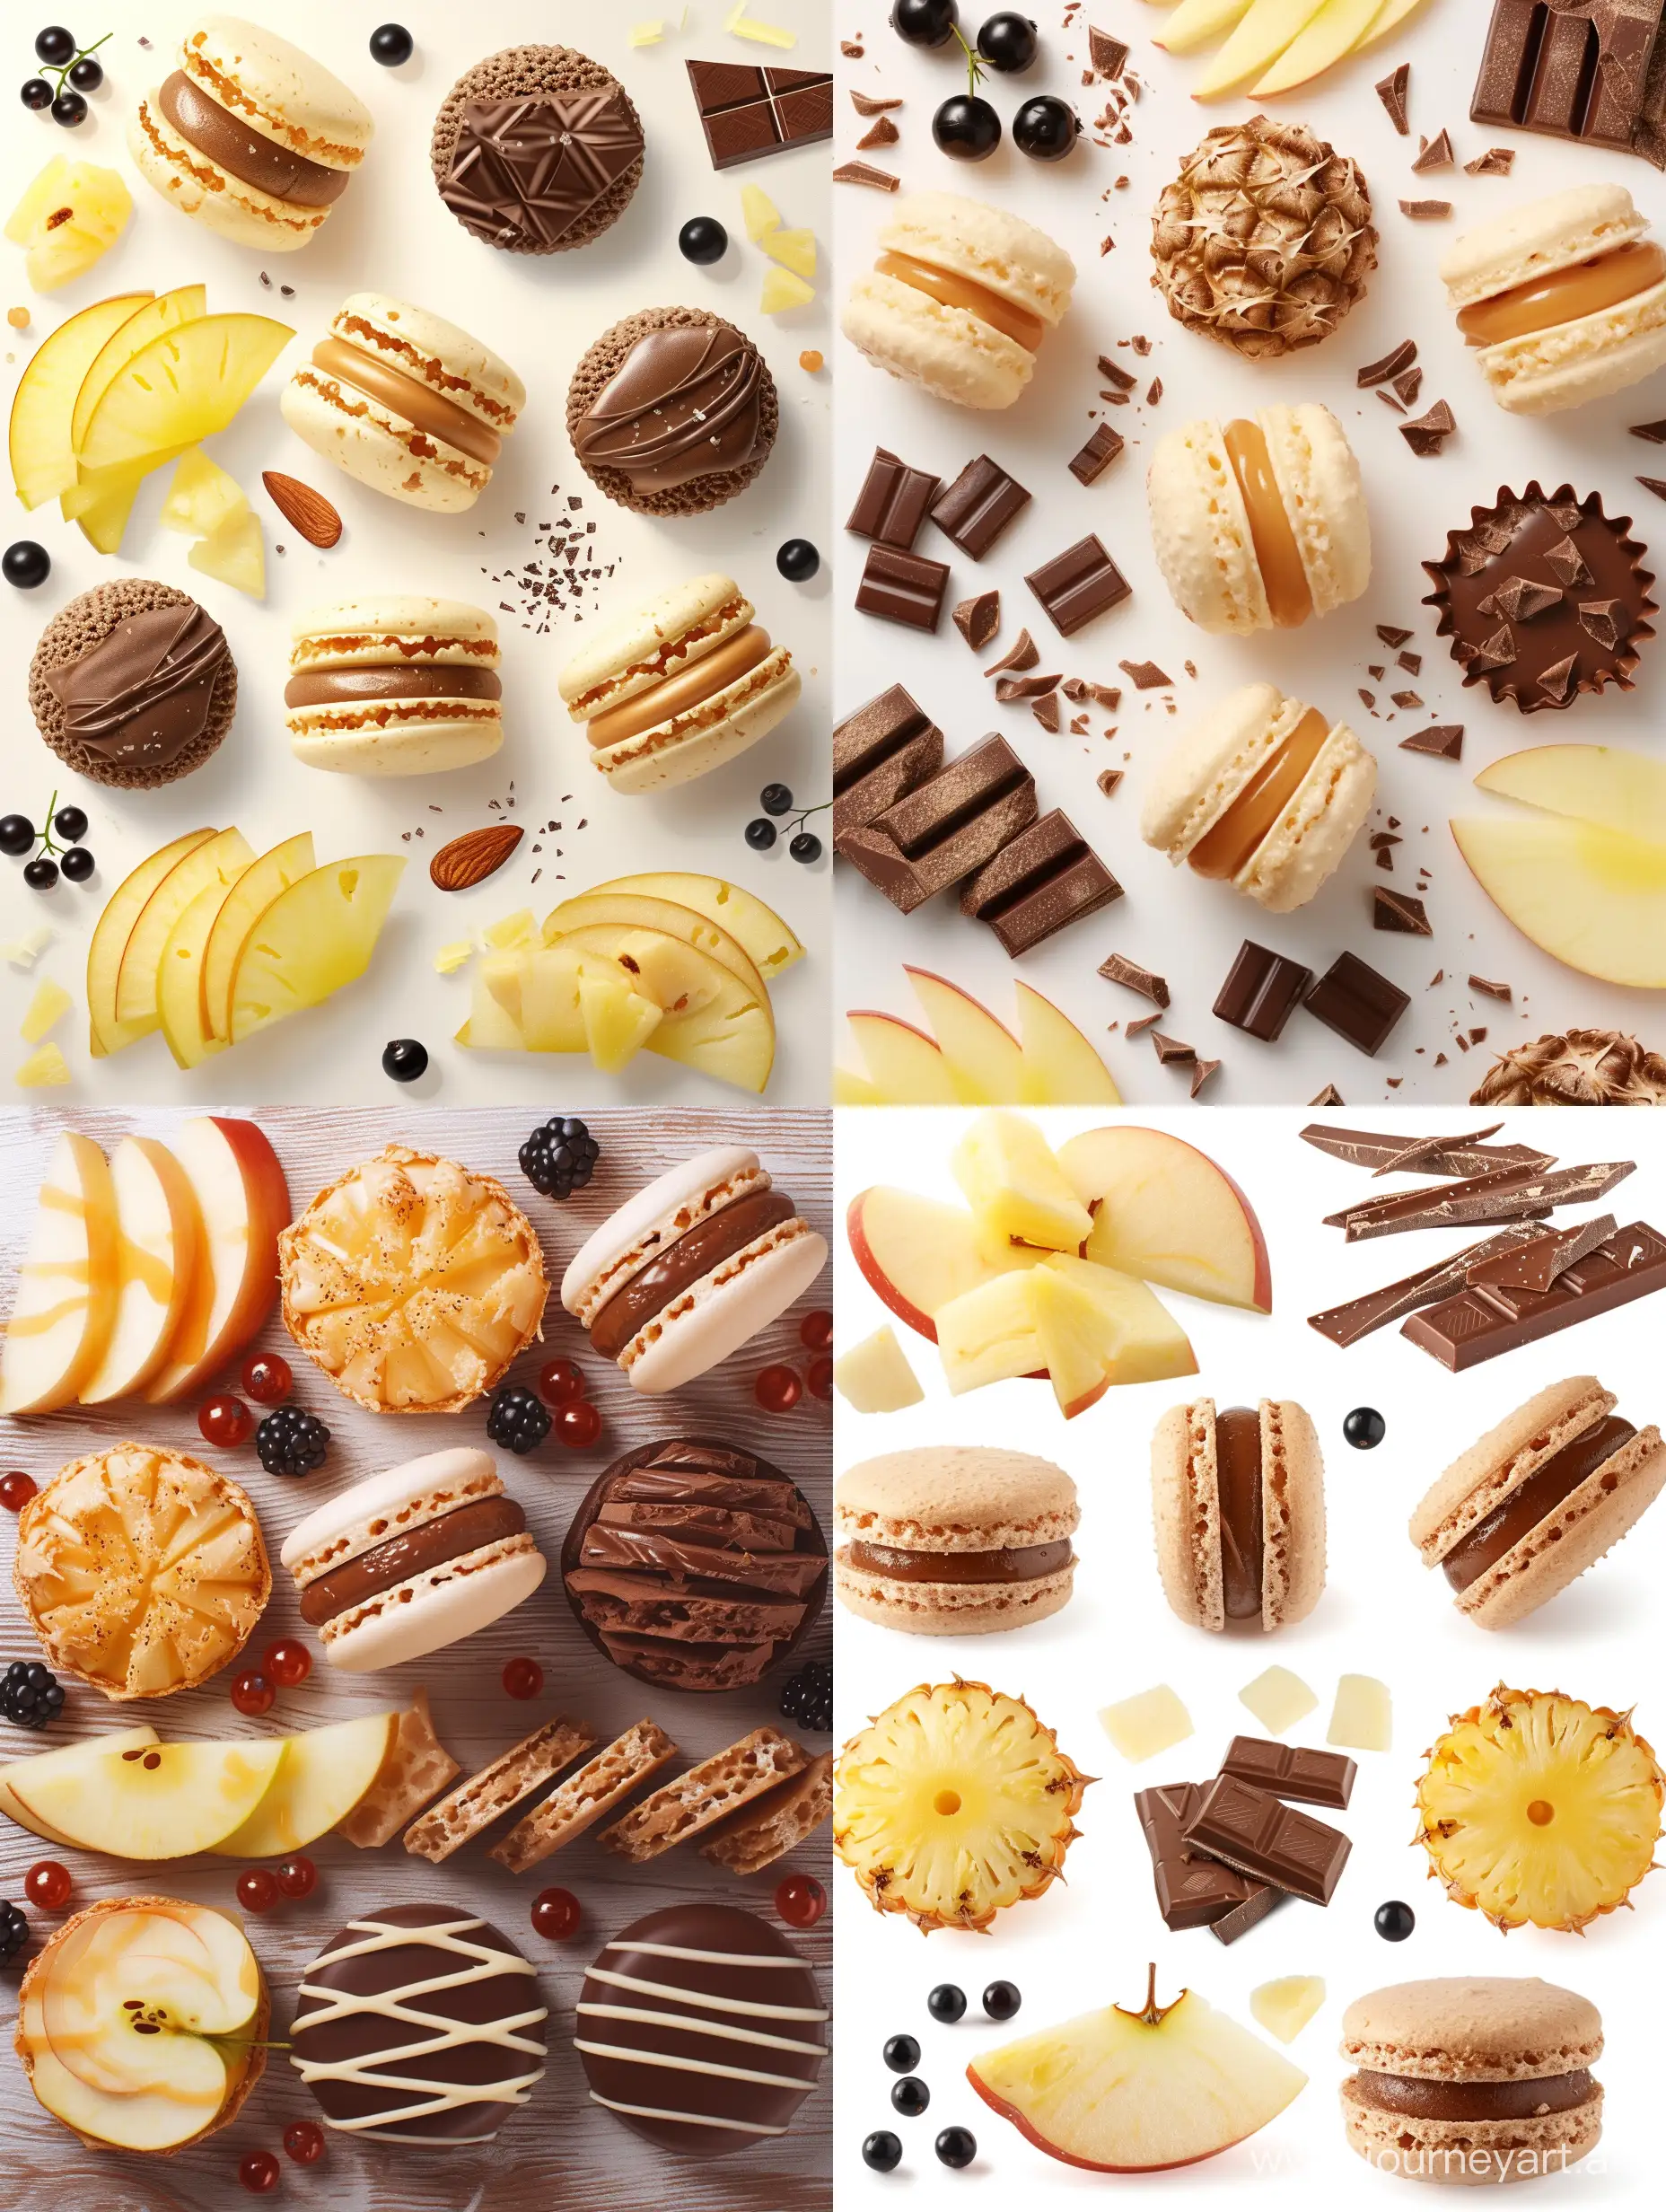 Macaroon, the taste of apple and caramel chocolate, the taste of pineapple with parmesan cheese, the taste of black currant, apple slices, chocolate slices, parmesan slices, several pieces, super realistic, without blurring